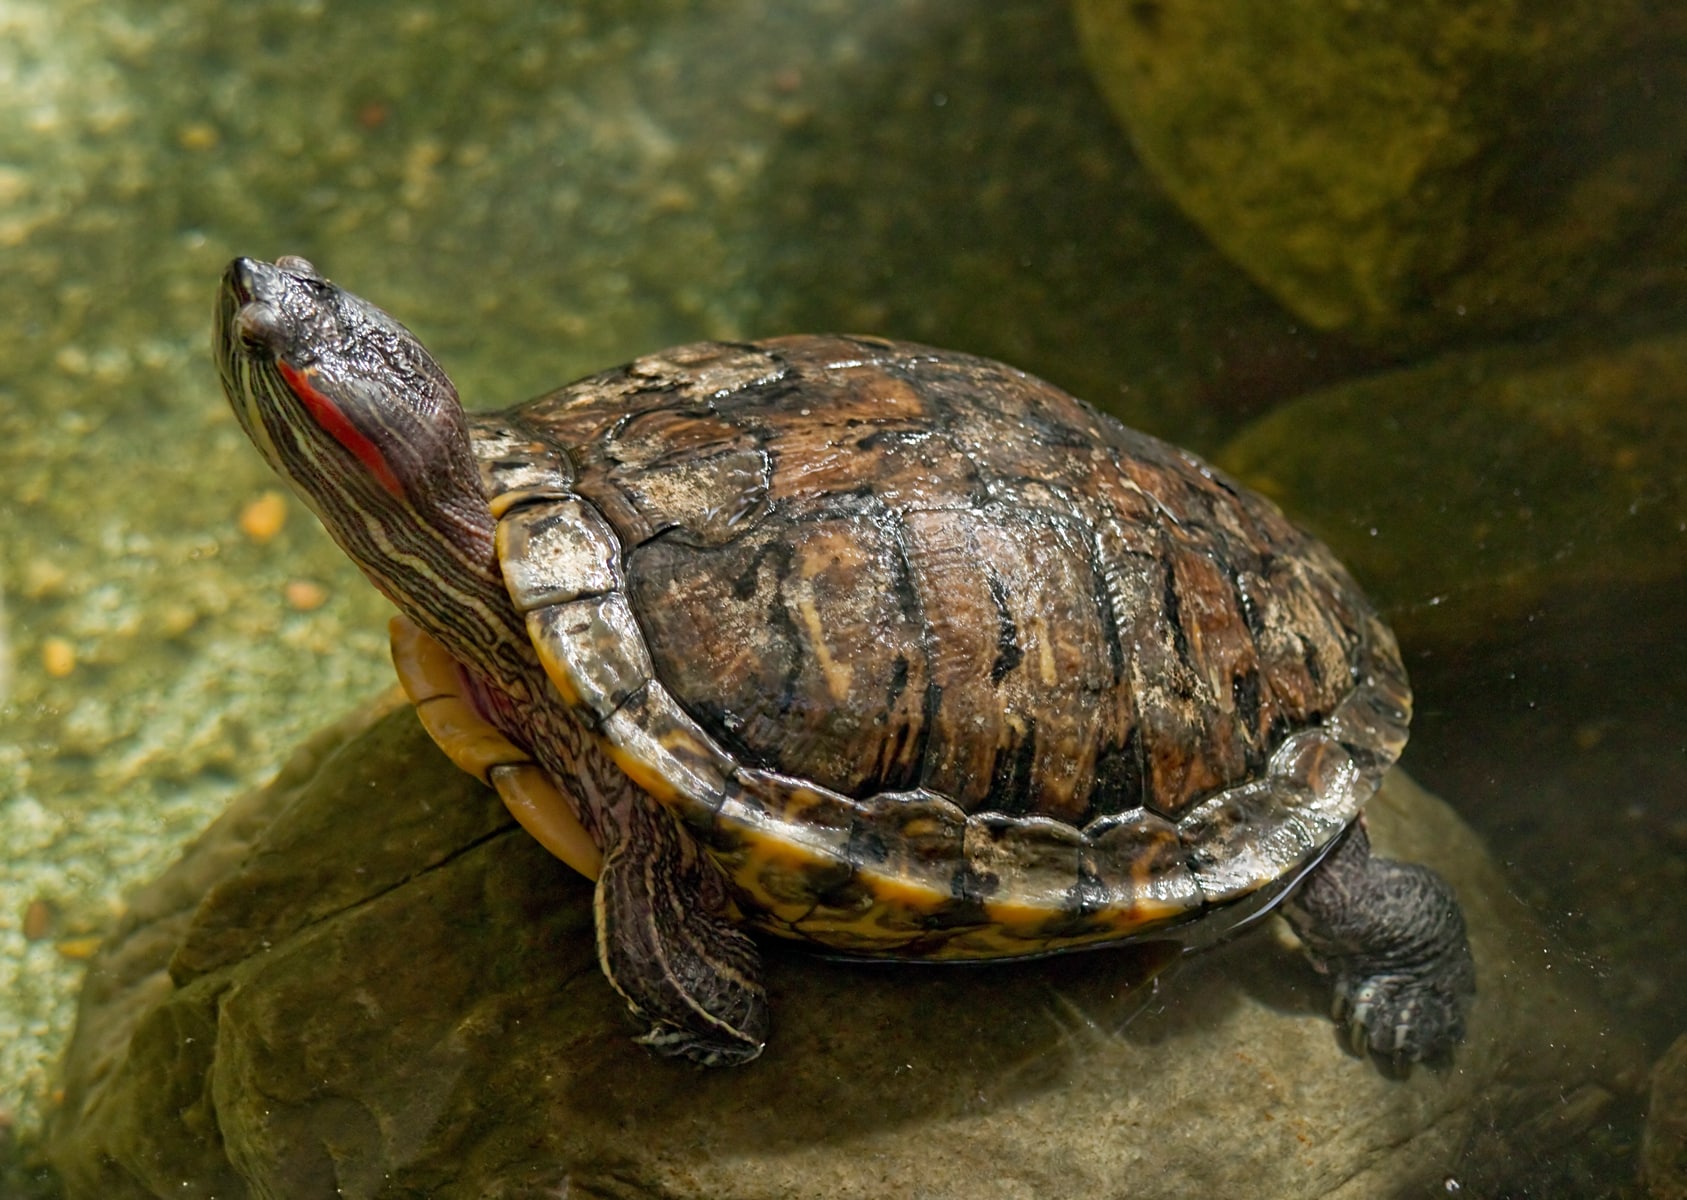 Are Red Eared Slider Turtles Invasive?